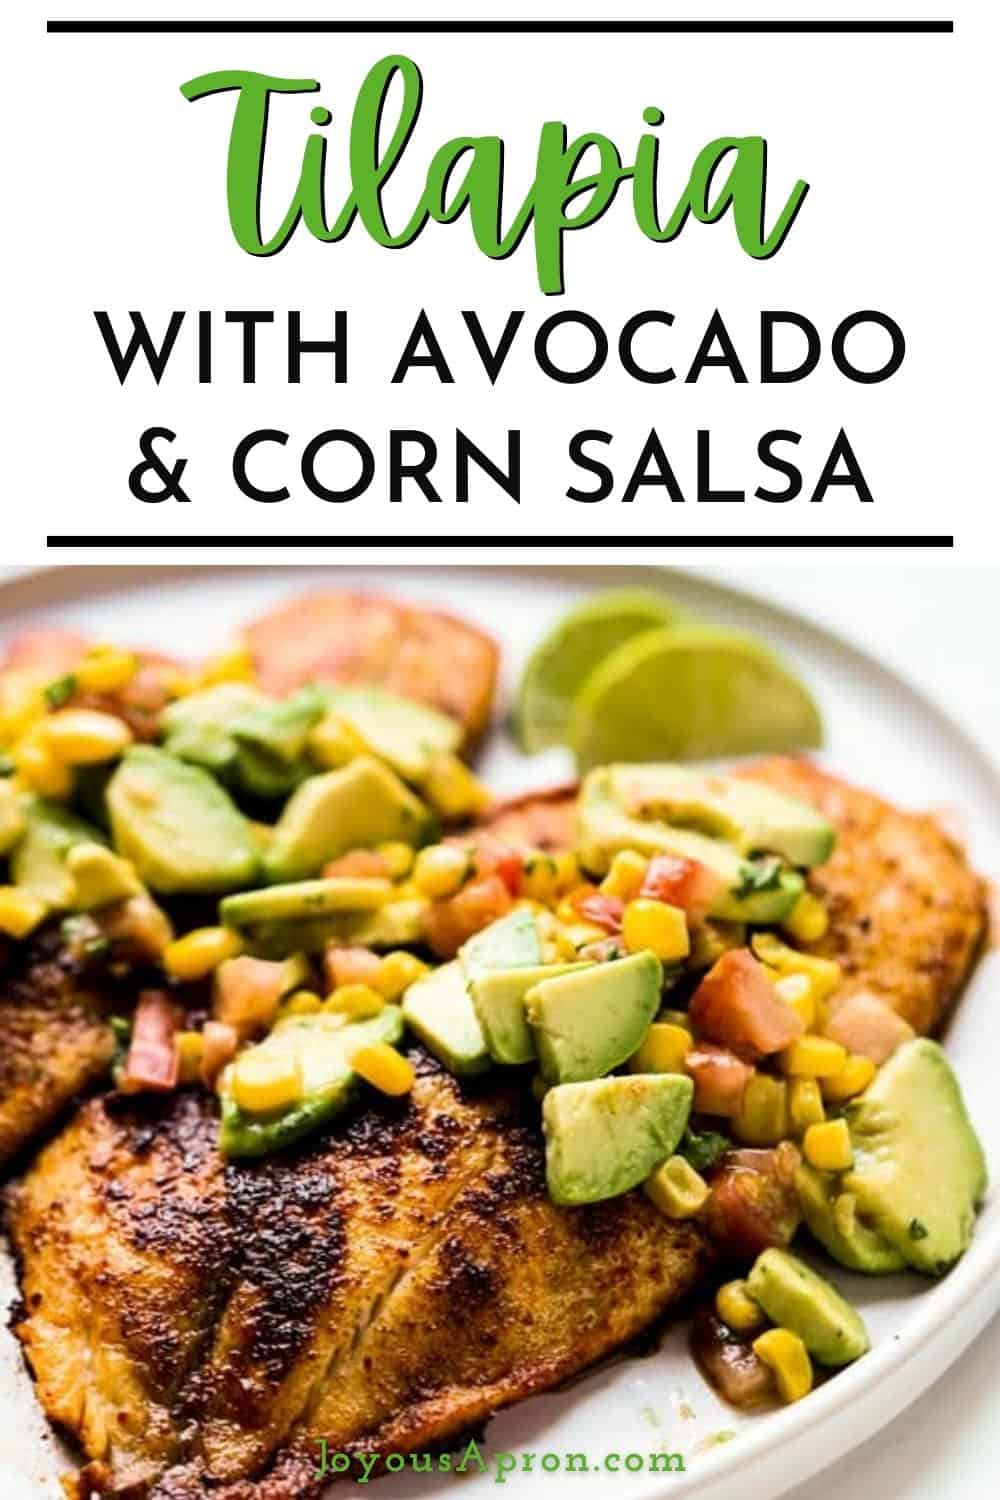 Tilapia with Avocado and Corn Salsa - easy and yummy healthy fish recipe. Pan-fried tilapia with lots of smoky, garlicky flavor, topped with an avocado corn salsa that is sweet, crunchy, and citrusy. via @joyousapron